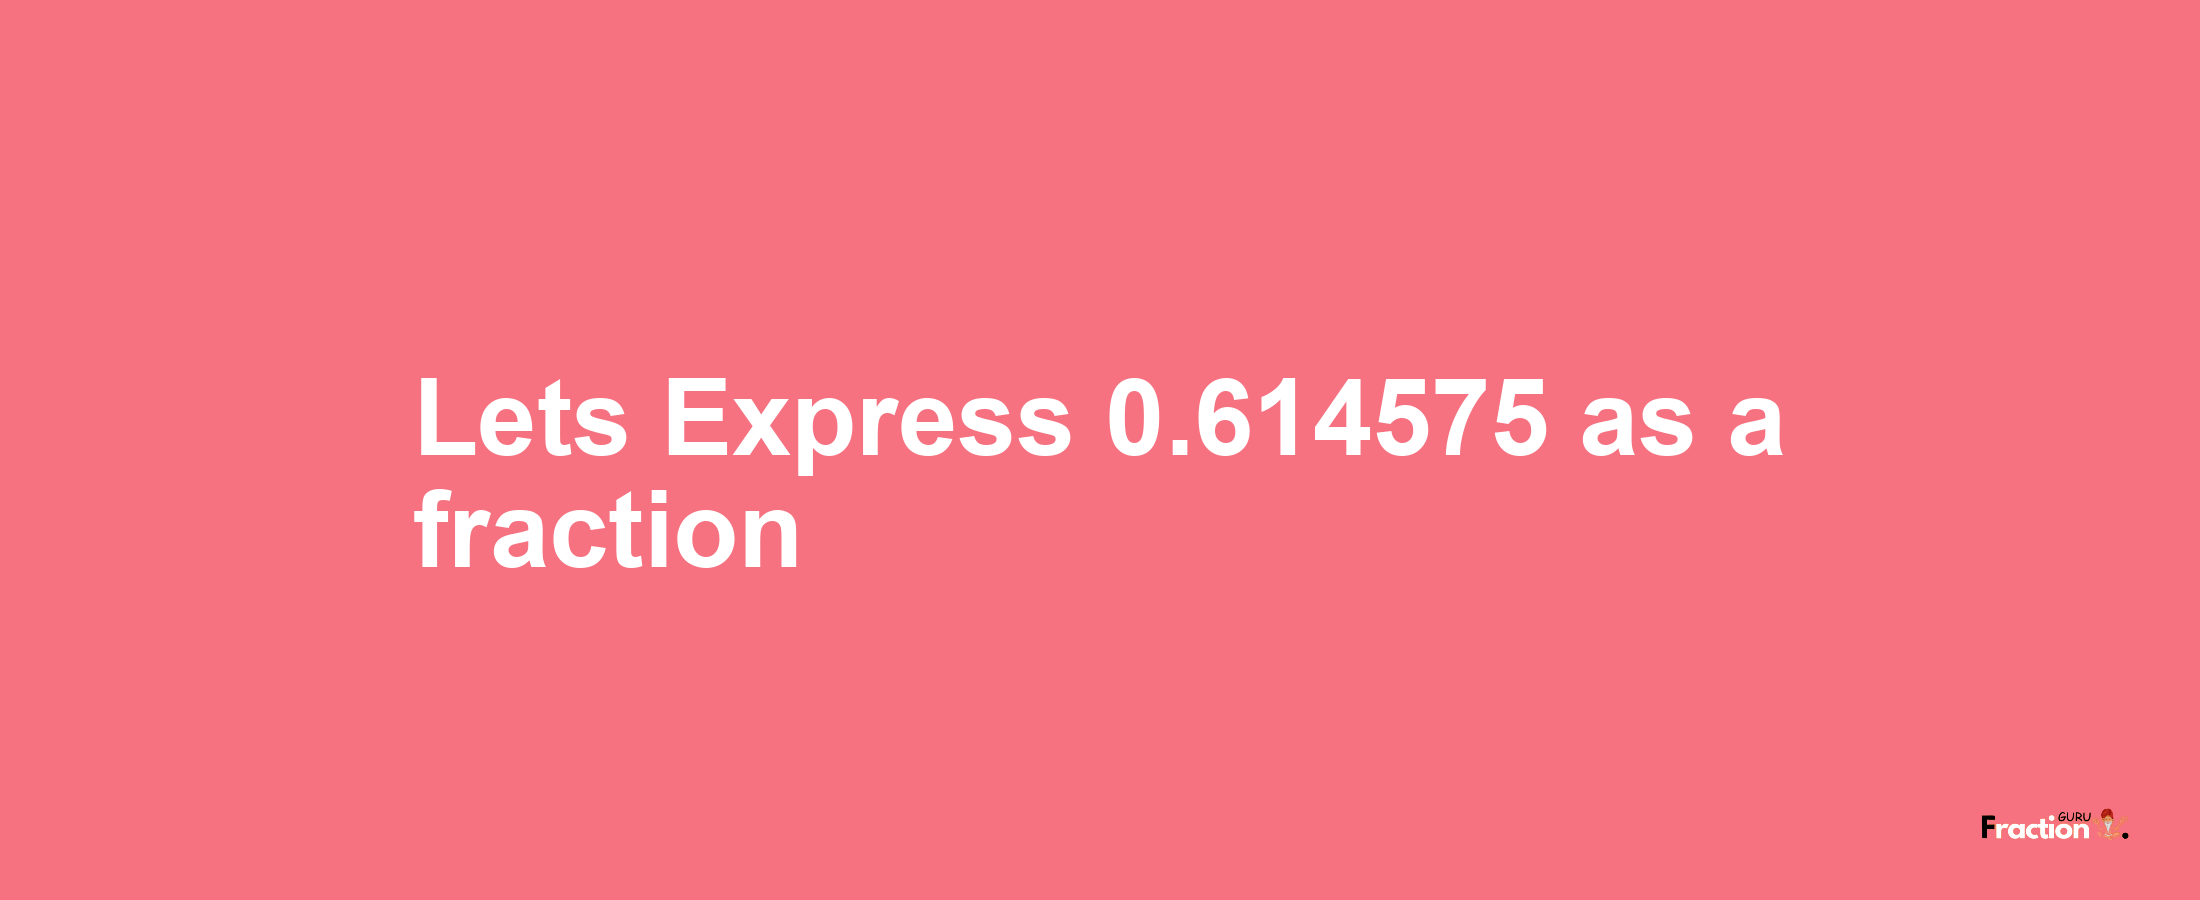 Lets Express 0.614575 as afraction